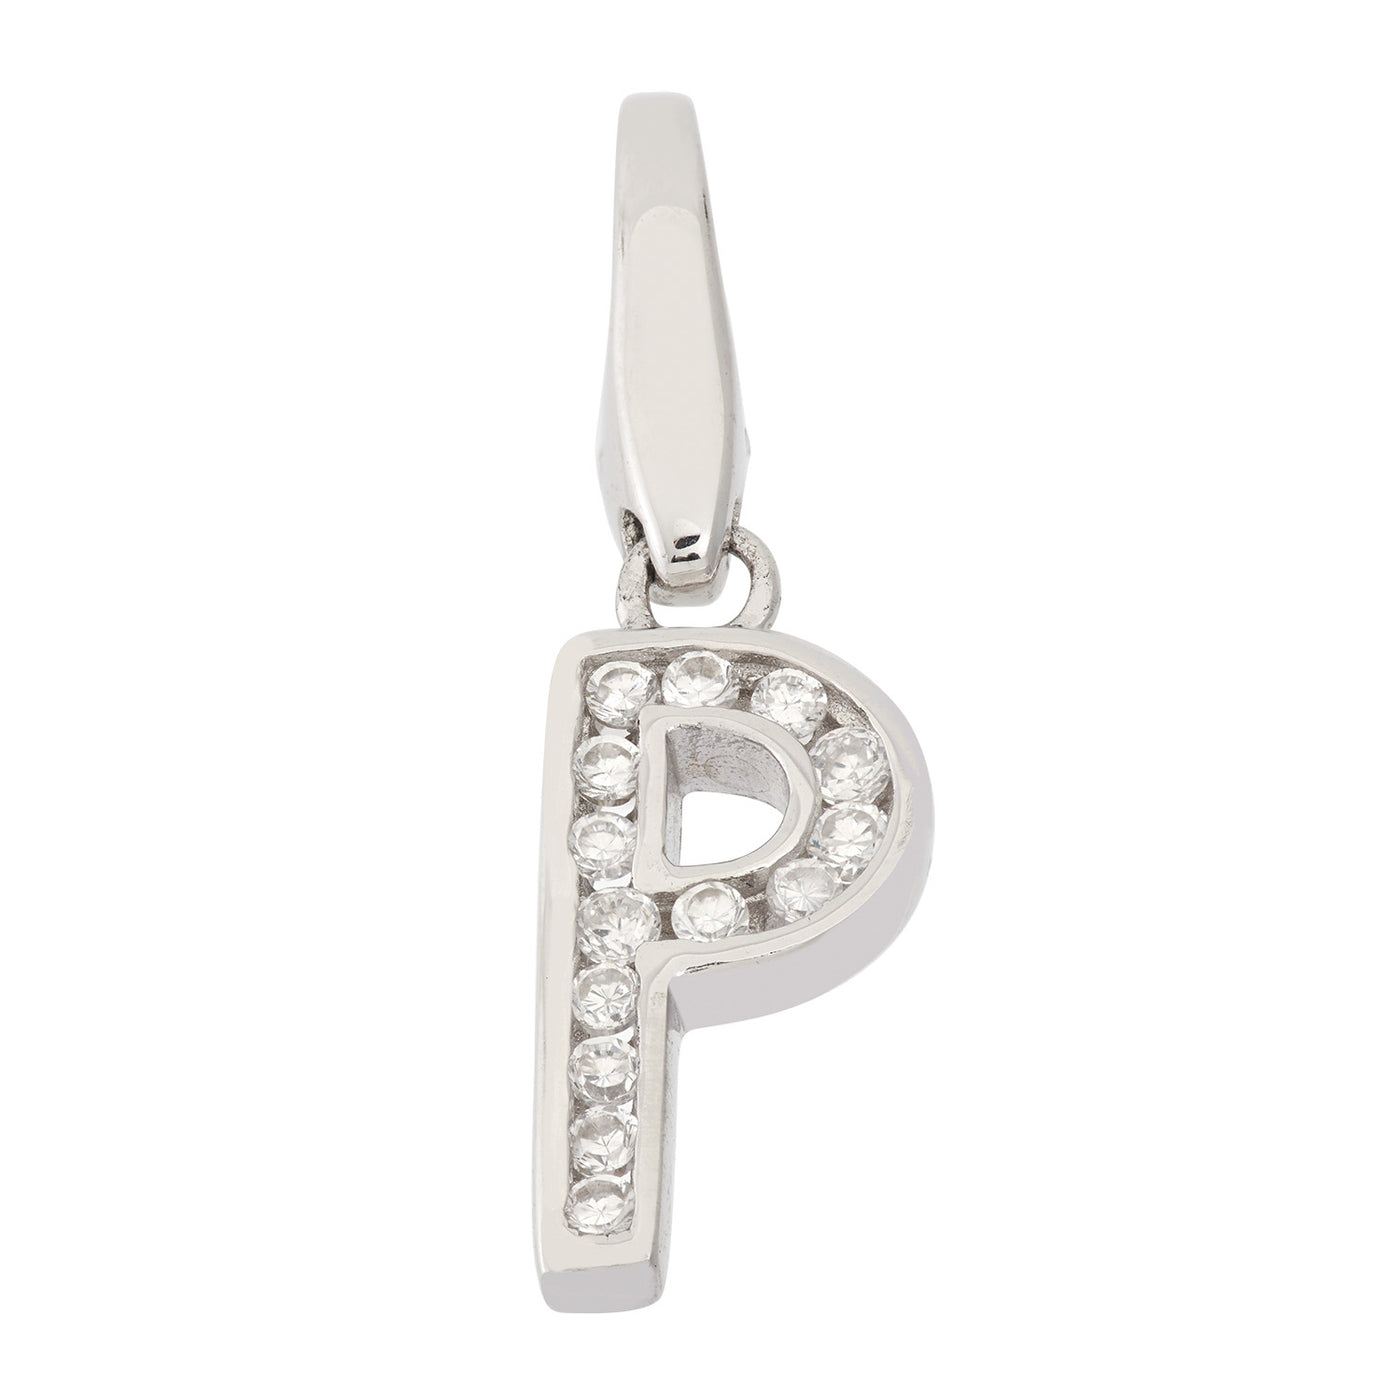 Rebecca Sloane Sterling Silver "P" With Cz Charm